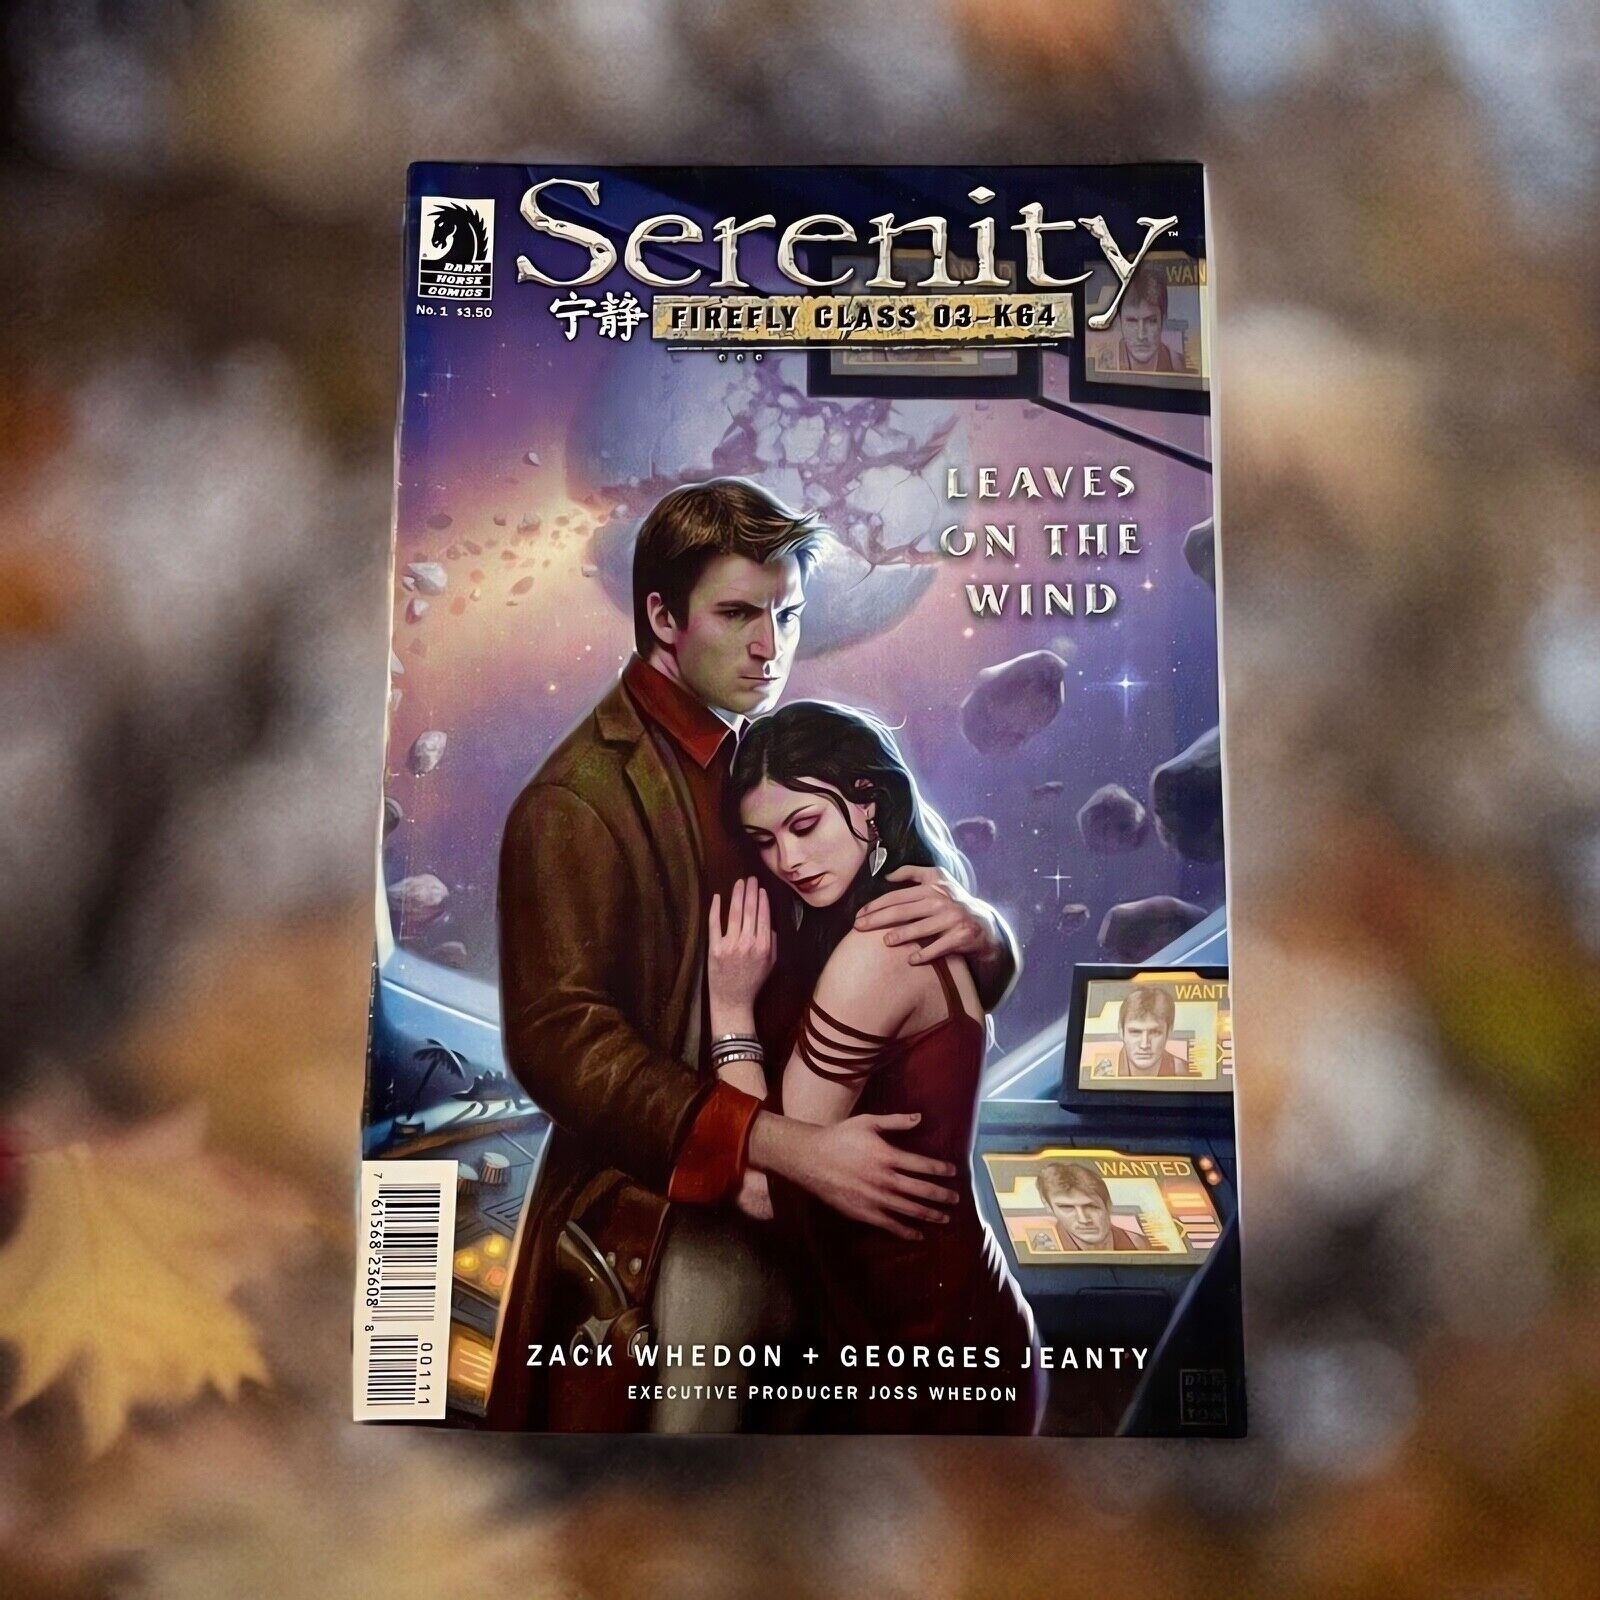 Serenity Leaves on the Wind #1 Dark Horse Comics  Firefly Class 03-K64